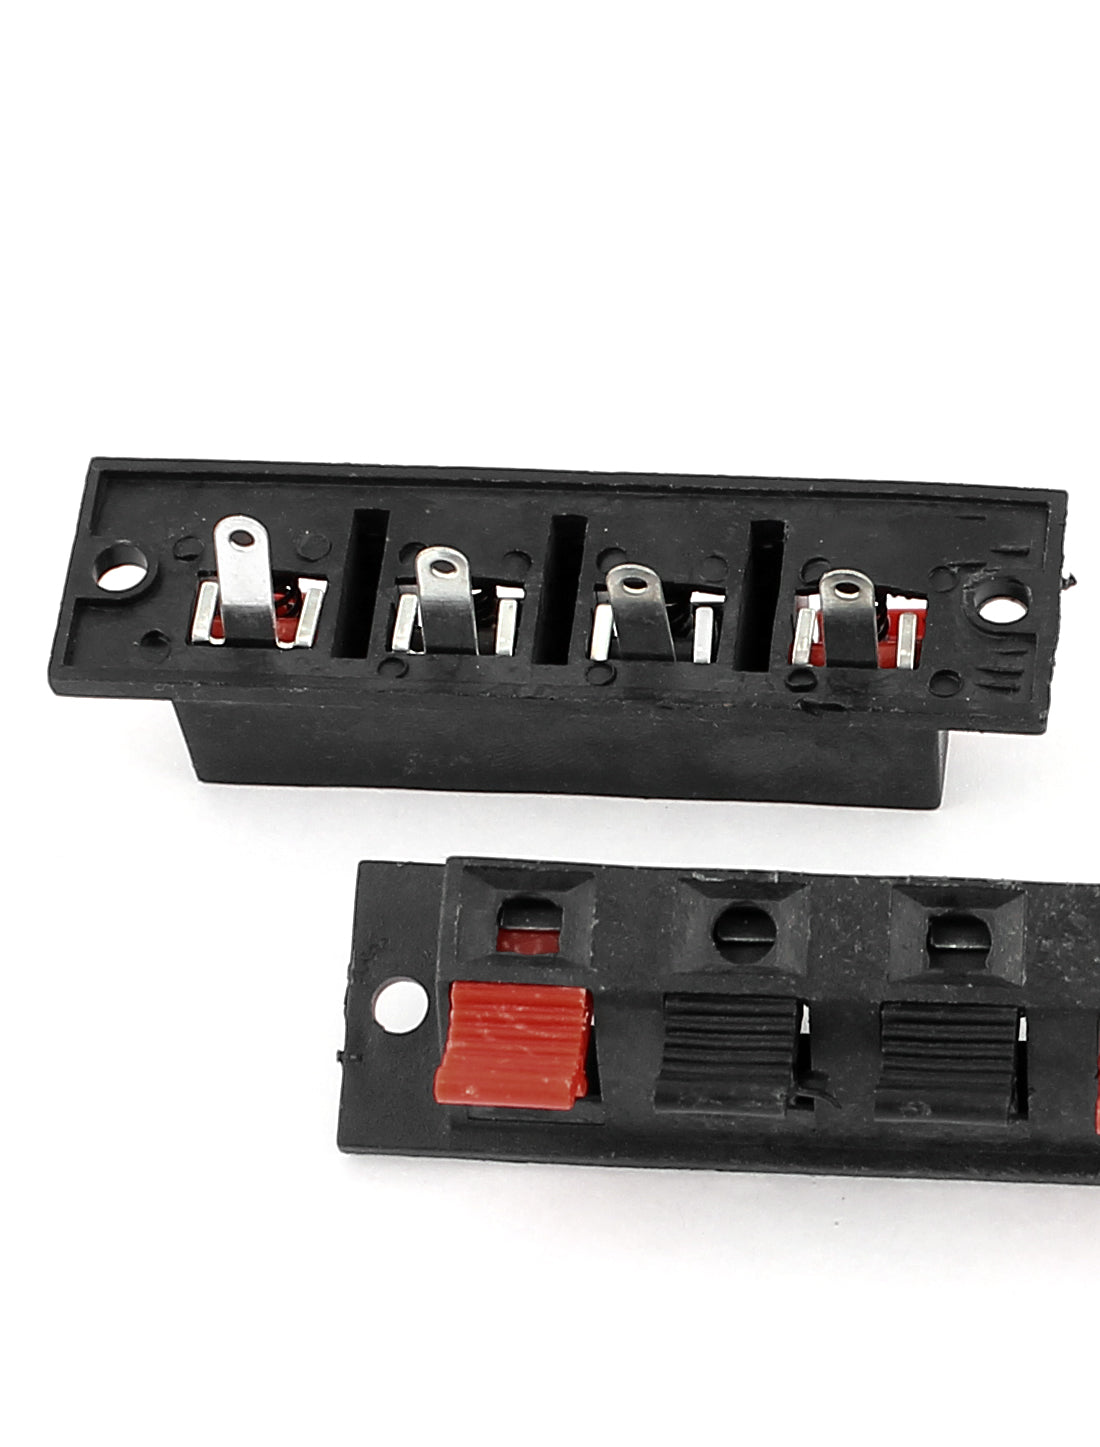 uxcell Uxcell 10 Pcs 4 Way Push Release Connector Plate Stereo Speaker Terminal Strip Block